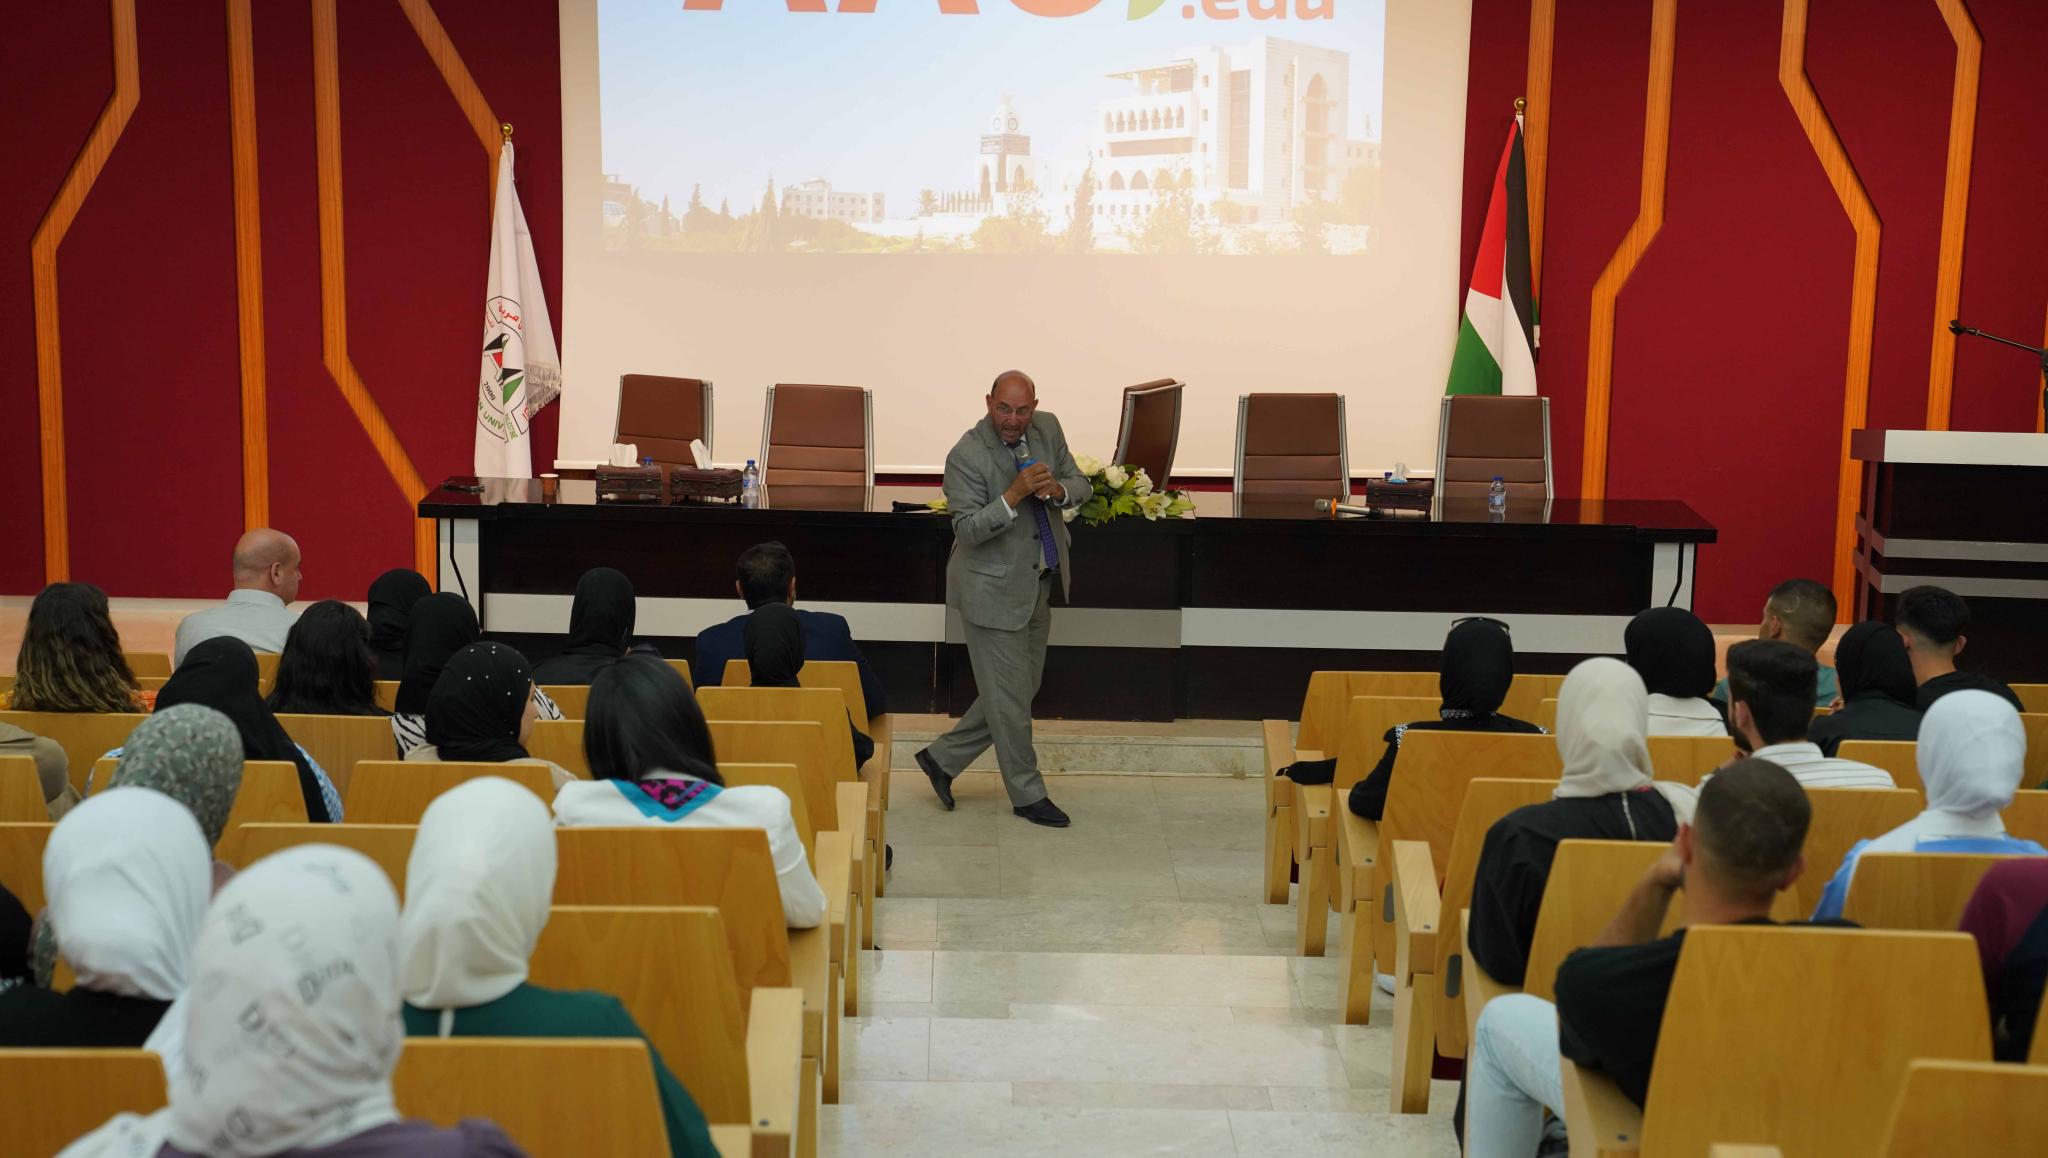 AAUP Hosts the International Trainer Dr. Monther Al-Haram in a Training Workshop for Students on Human Development